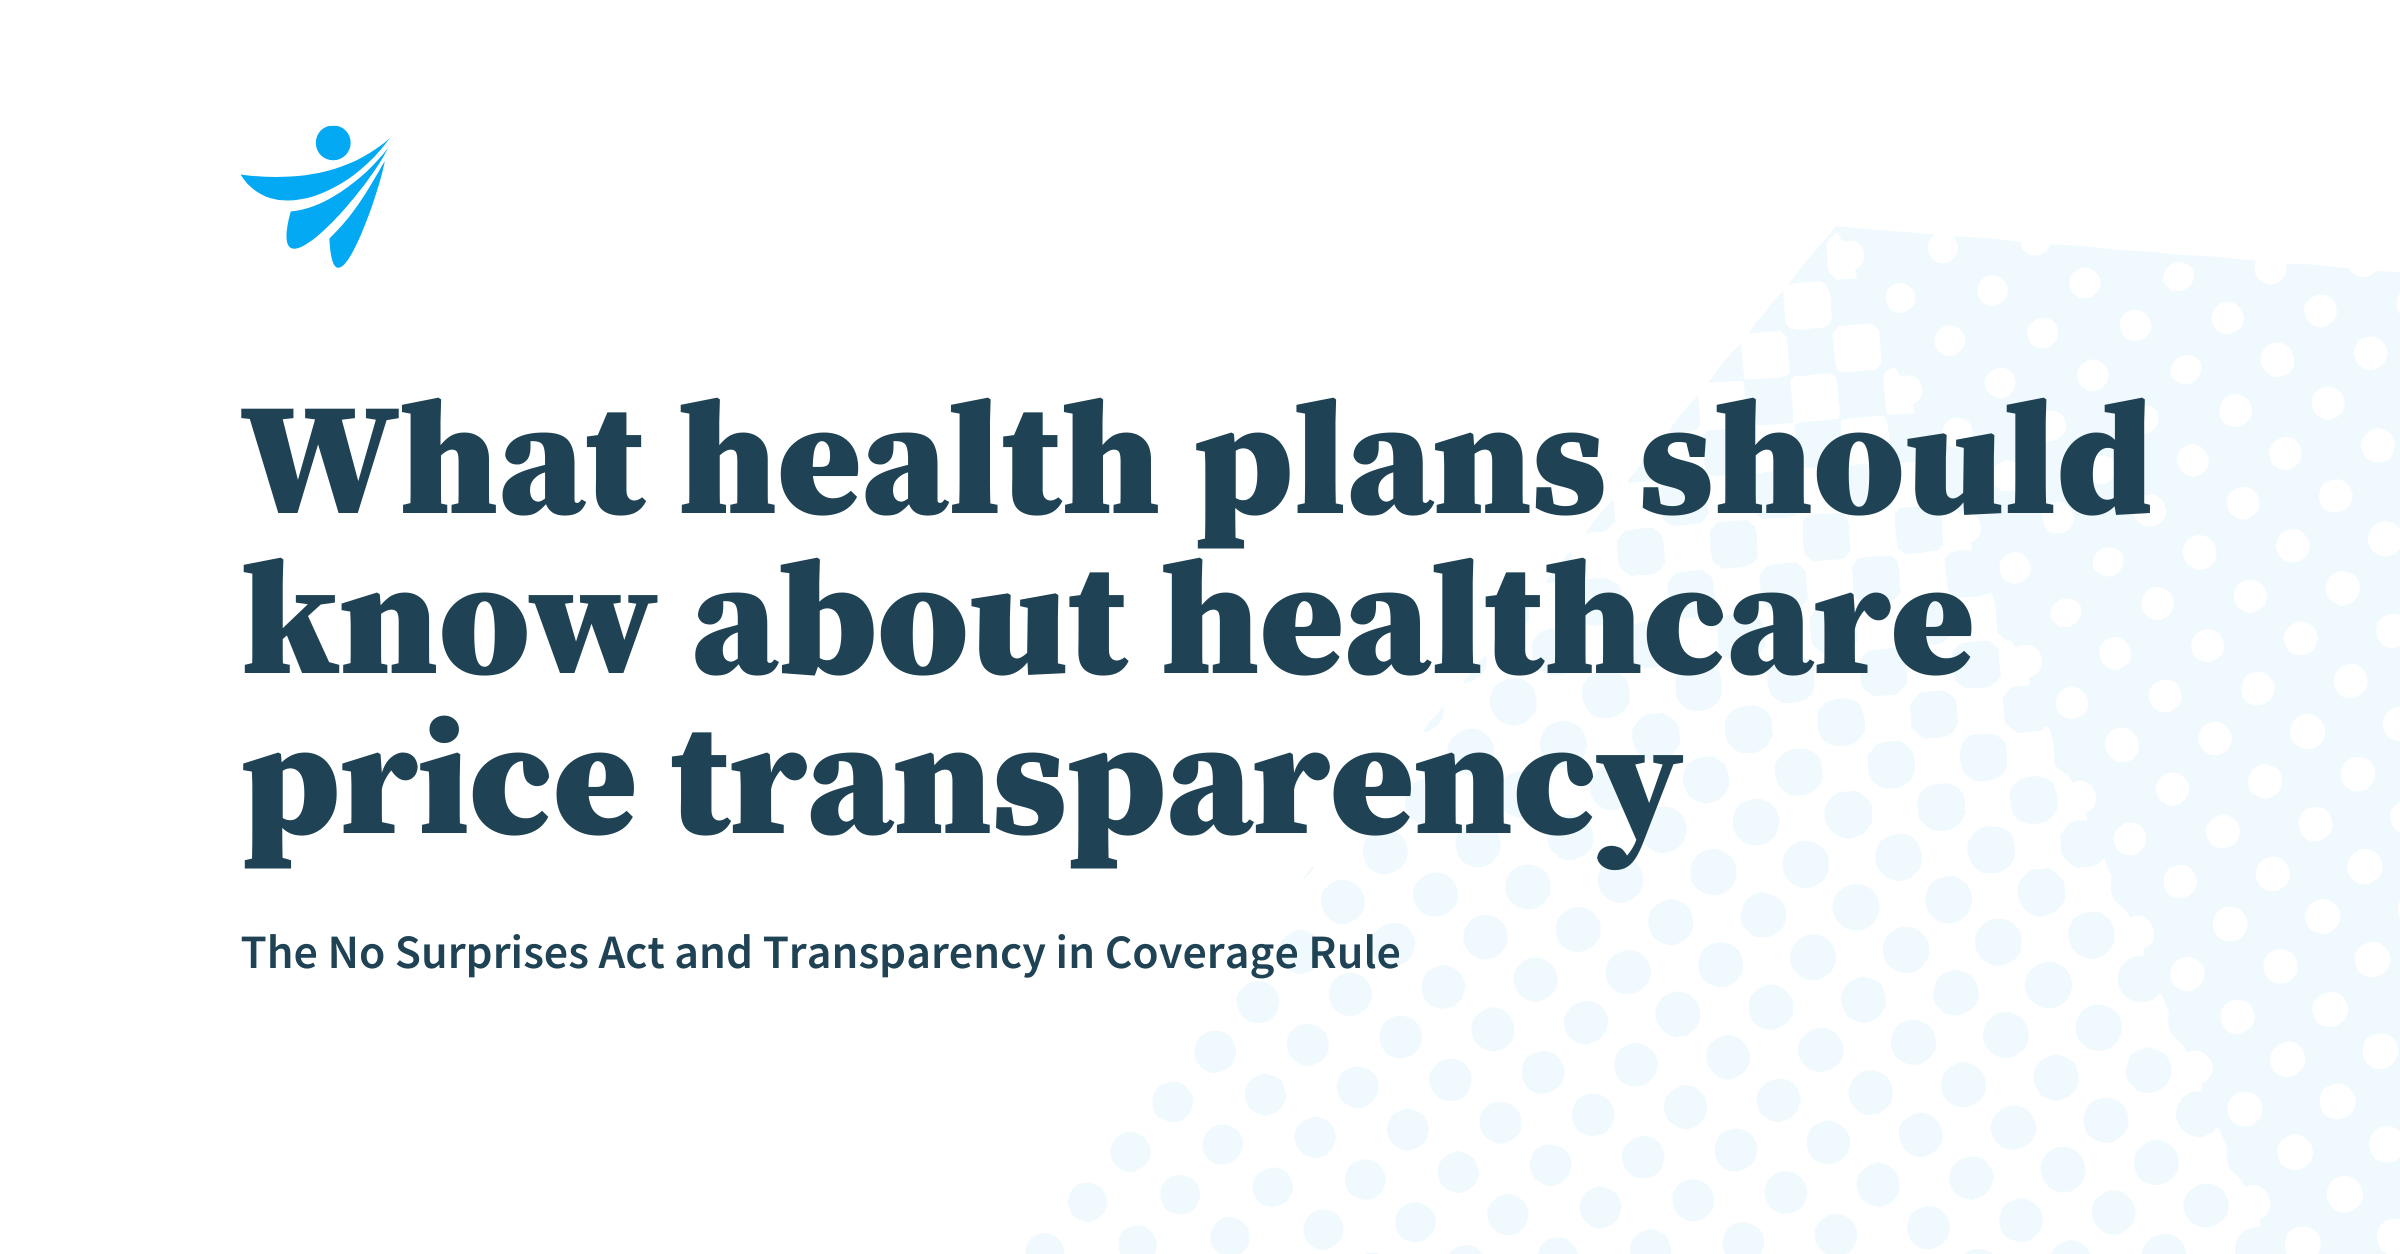 clarify health blog: The No Surprises Act and Transparency in Coverage Rule